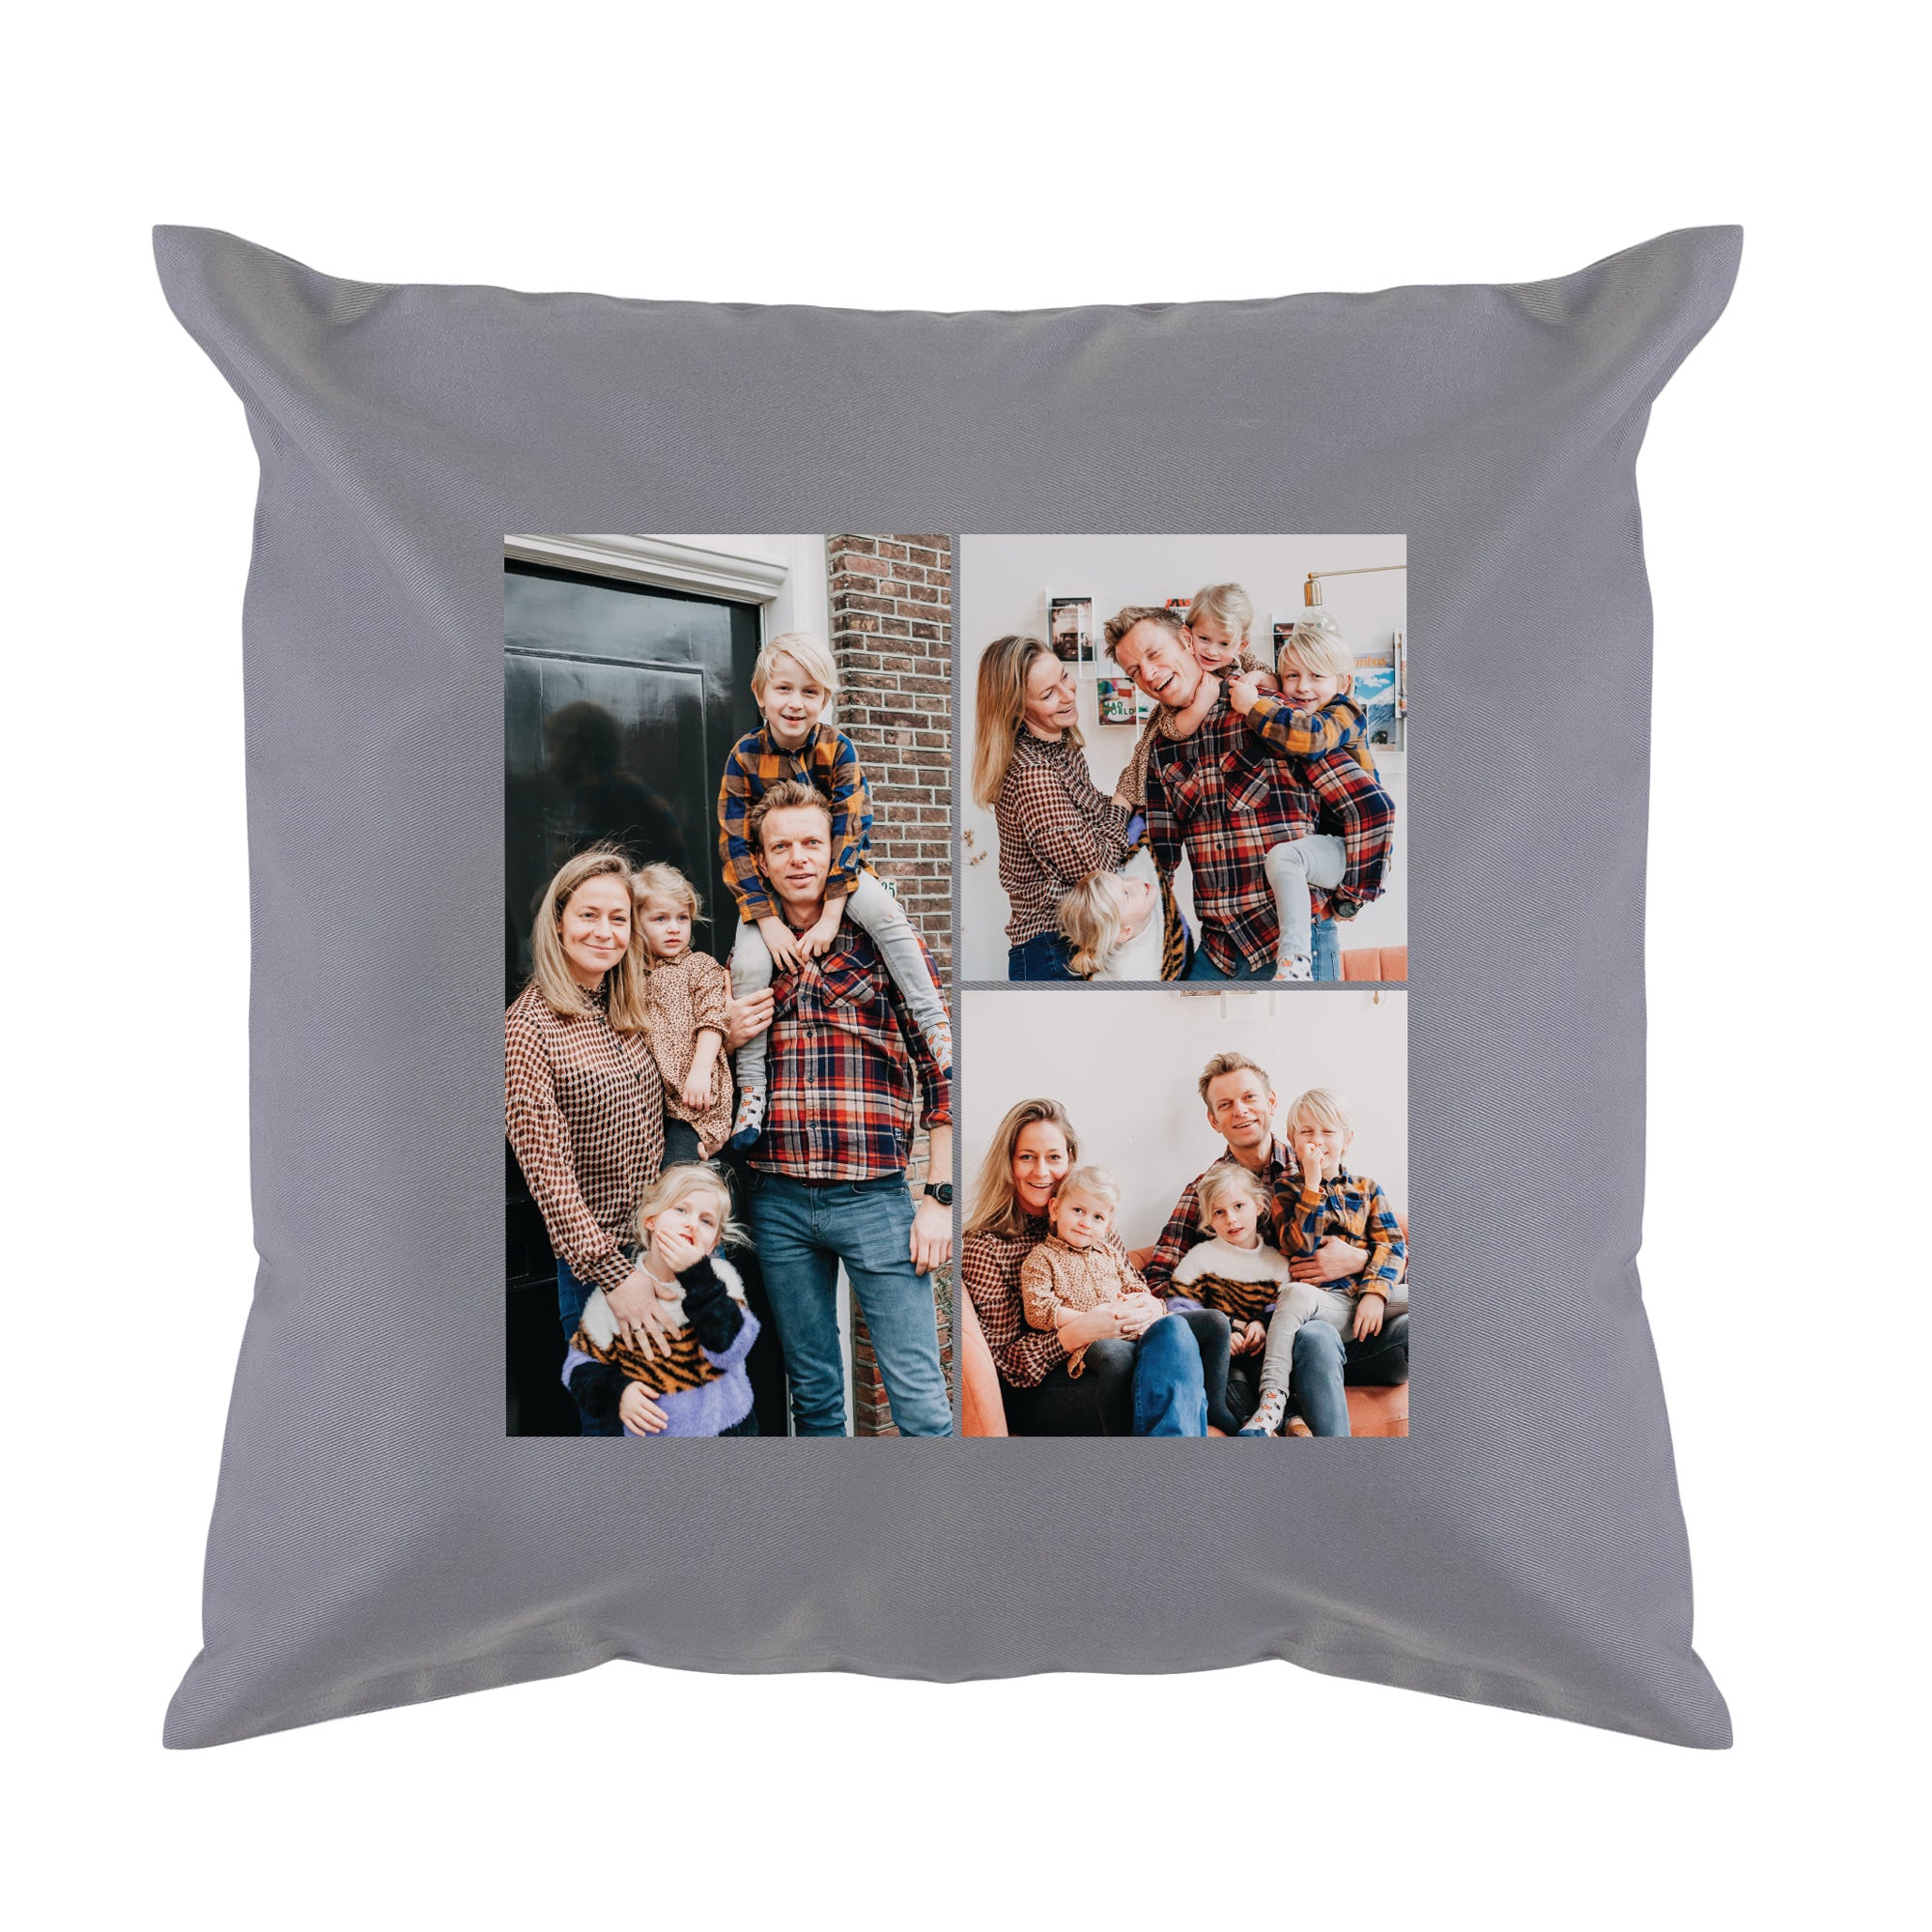 Personalised cushion - Father's Day - Light Grey